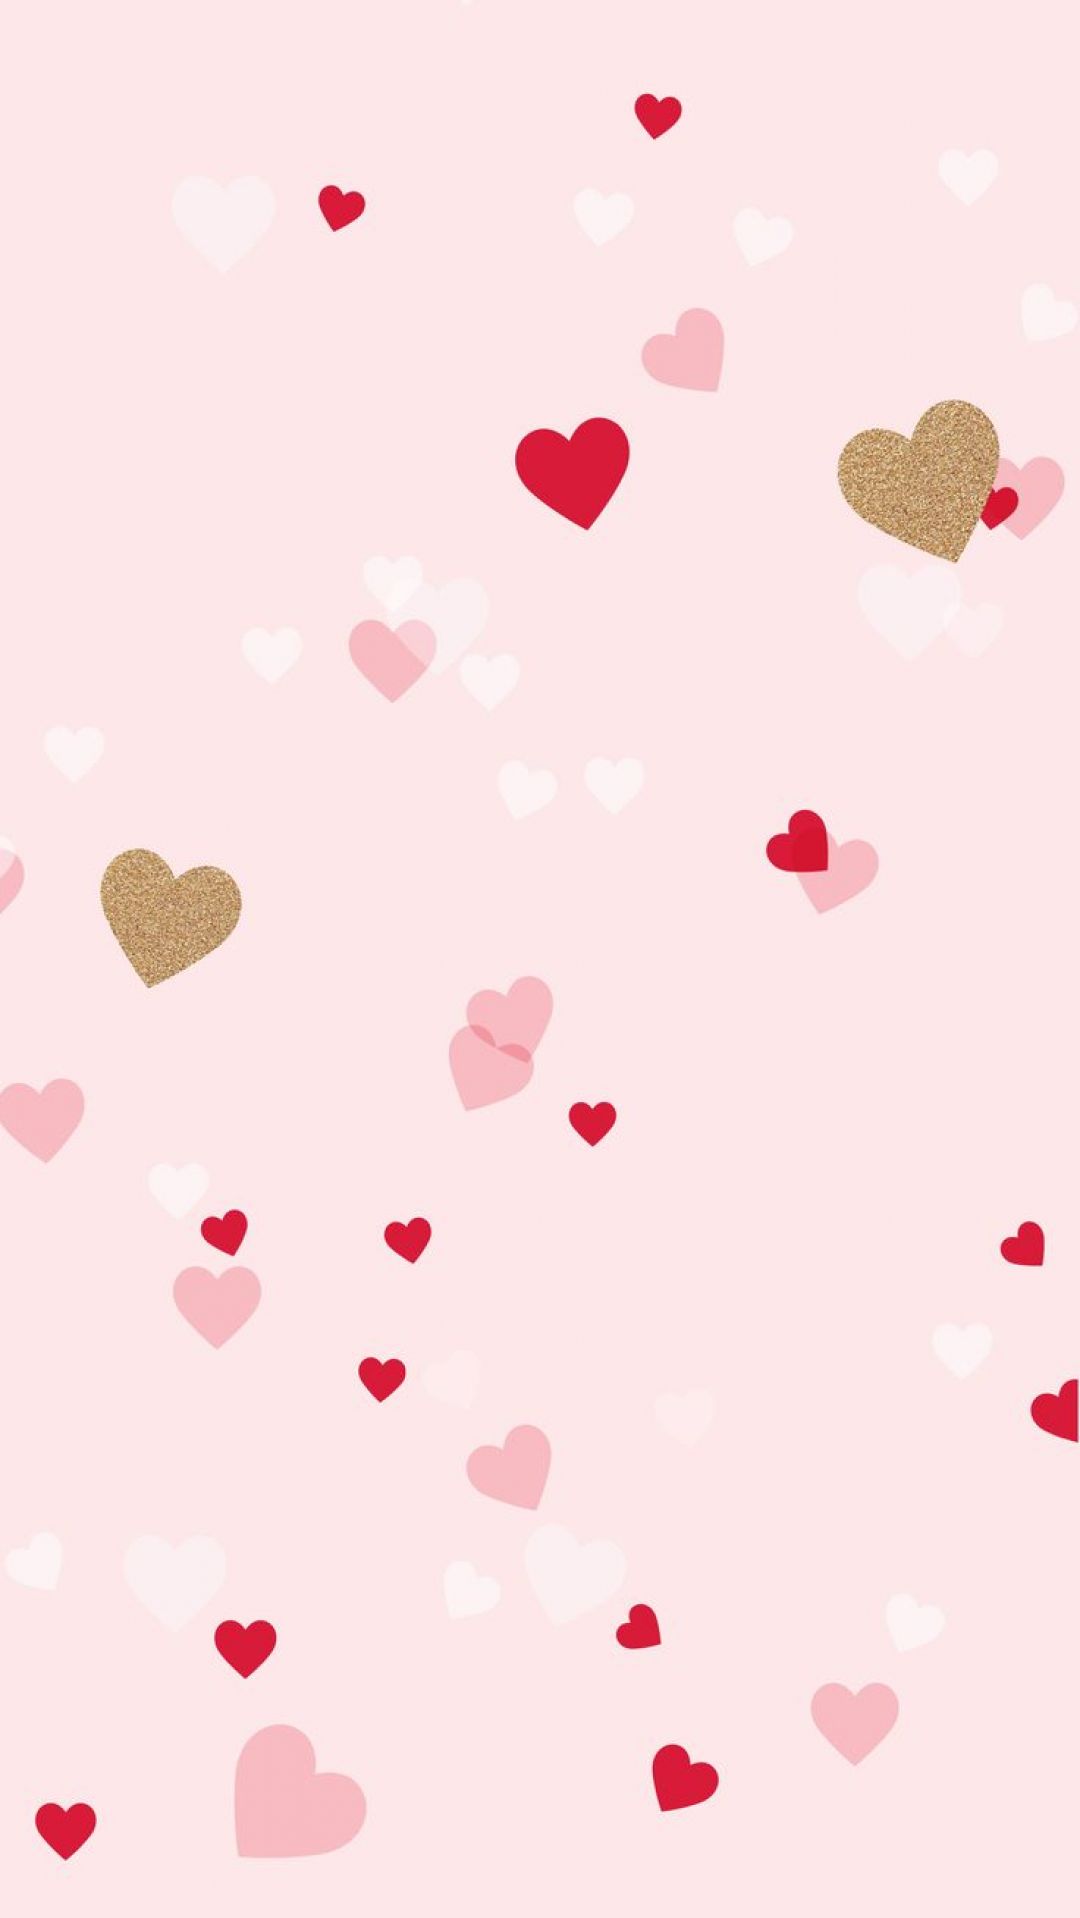 ✓[140+] Cute Heart - Android, iPhone, Desktop HD Backgrounds / Wallpapers ( 1080p, 4k) (png / jpg) (2023)